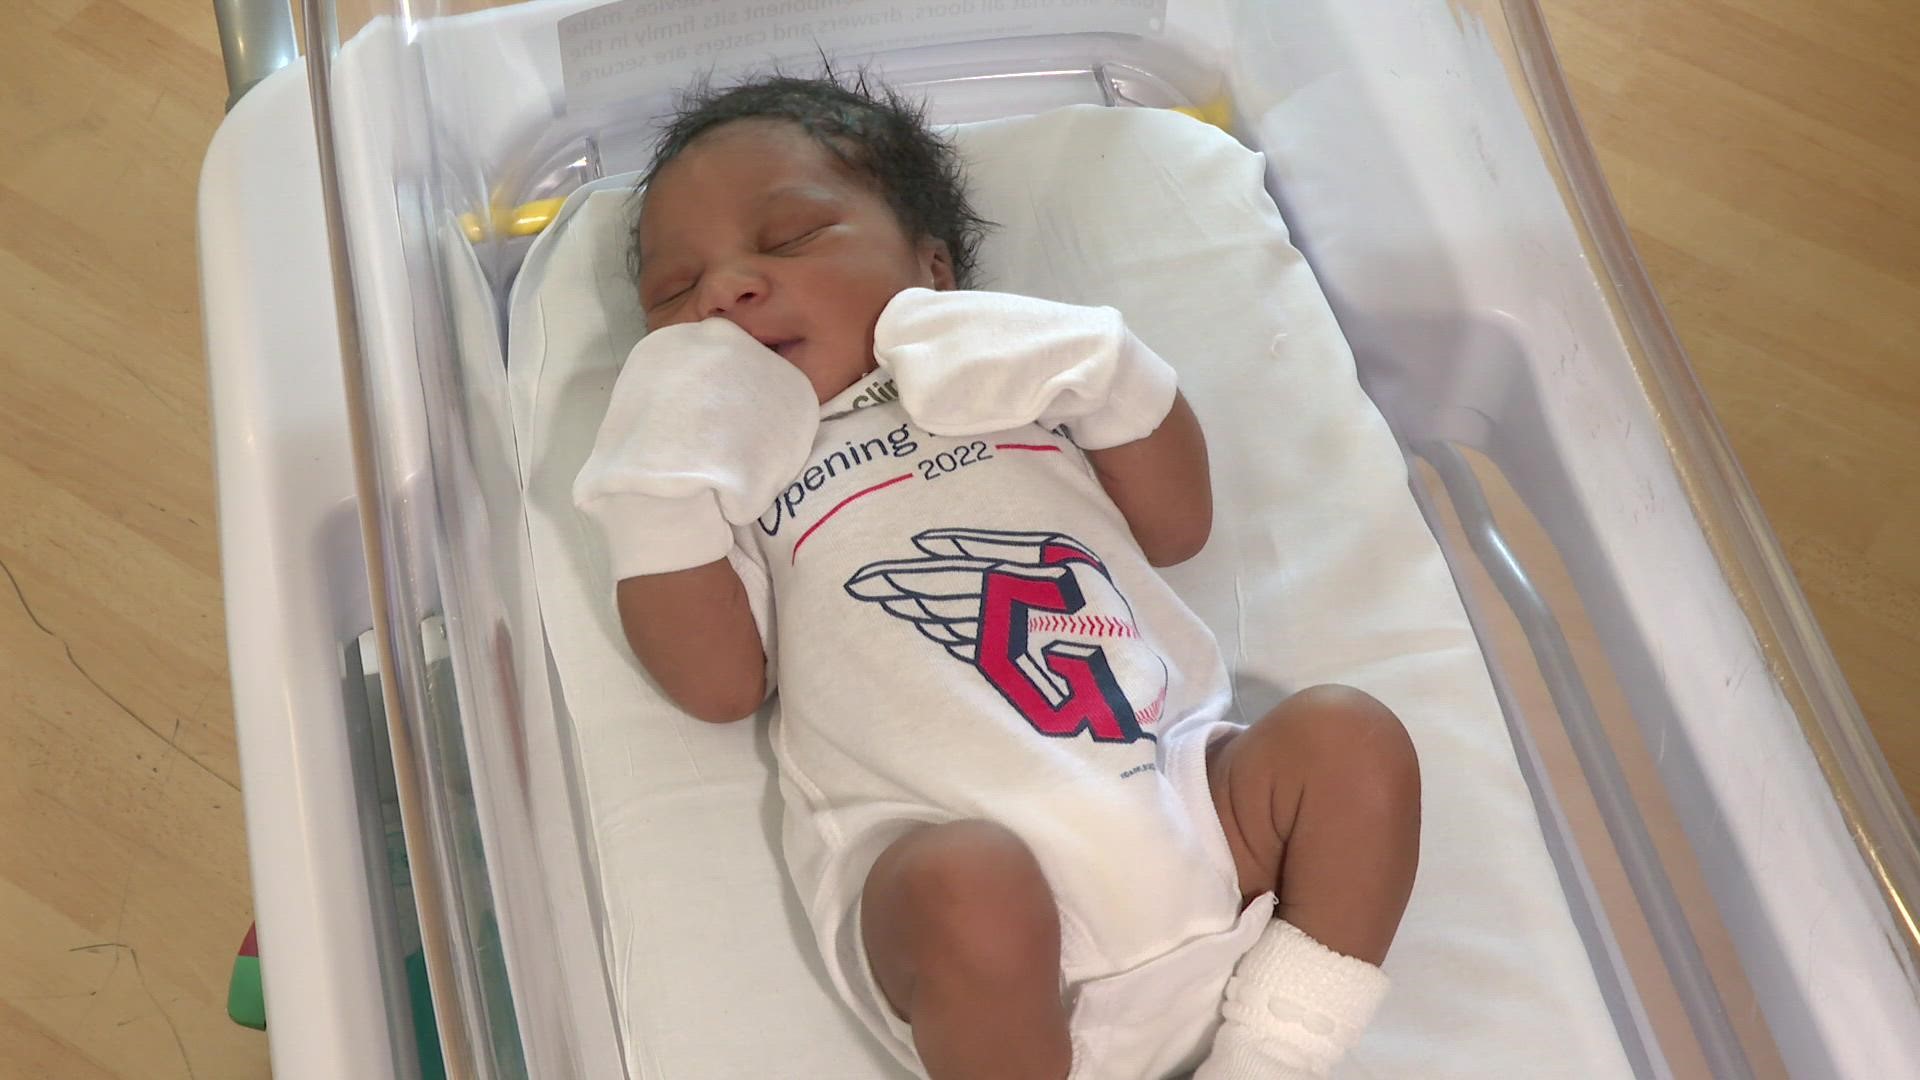 Cleveland Clinic and the Cleveland Guardians have partnered to celebrate 2022 Opening Day by giving co-branded onesies to all babies delivered at Cleveland Clinic.